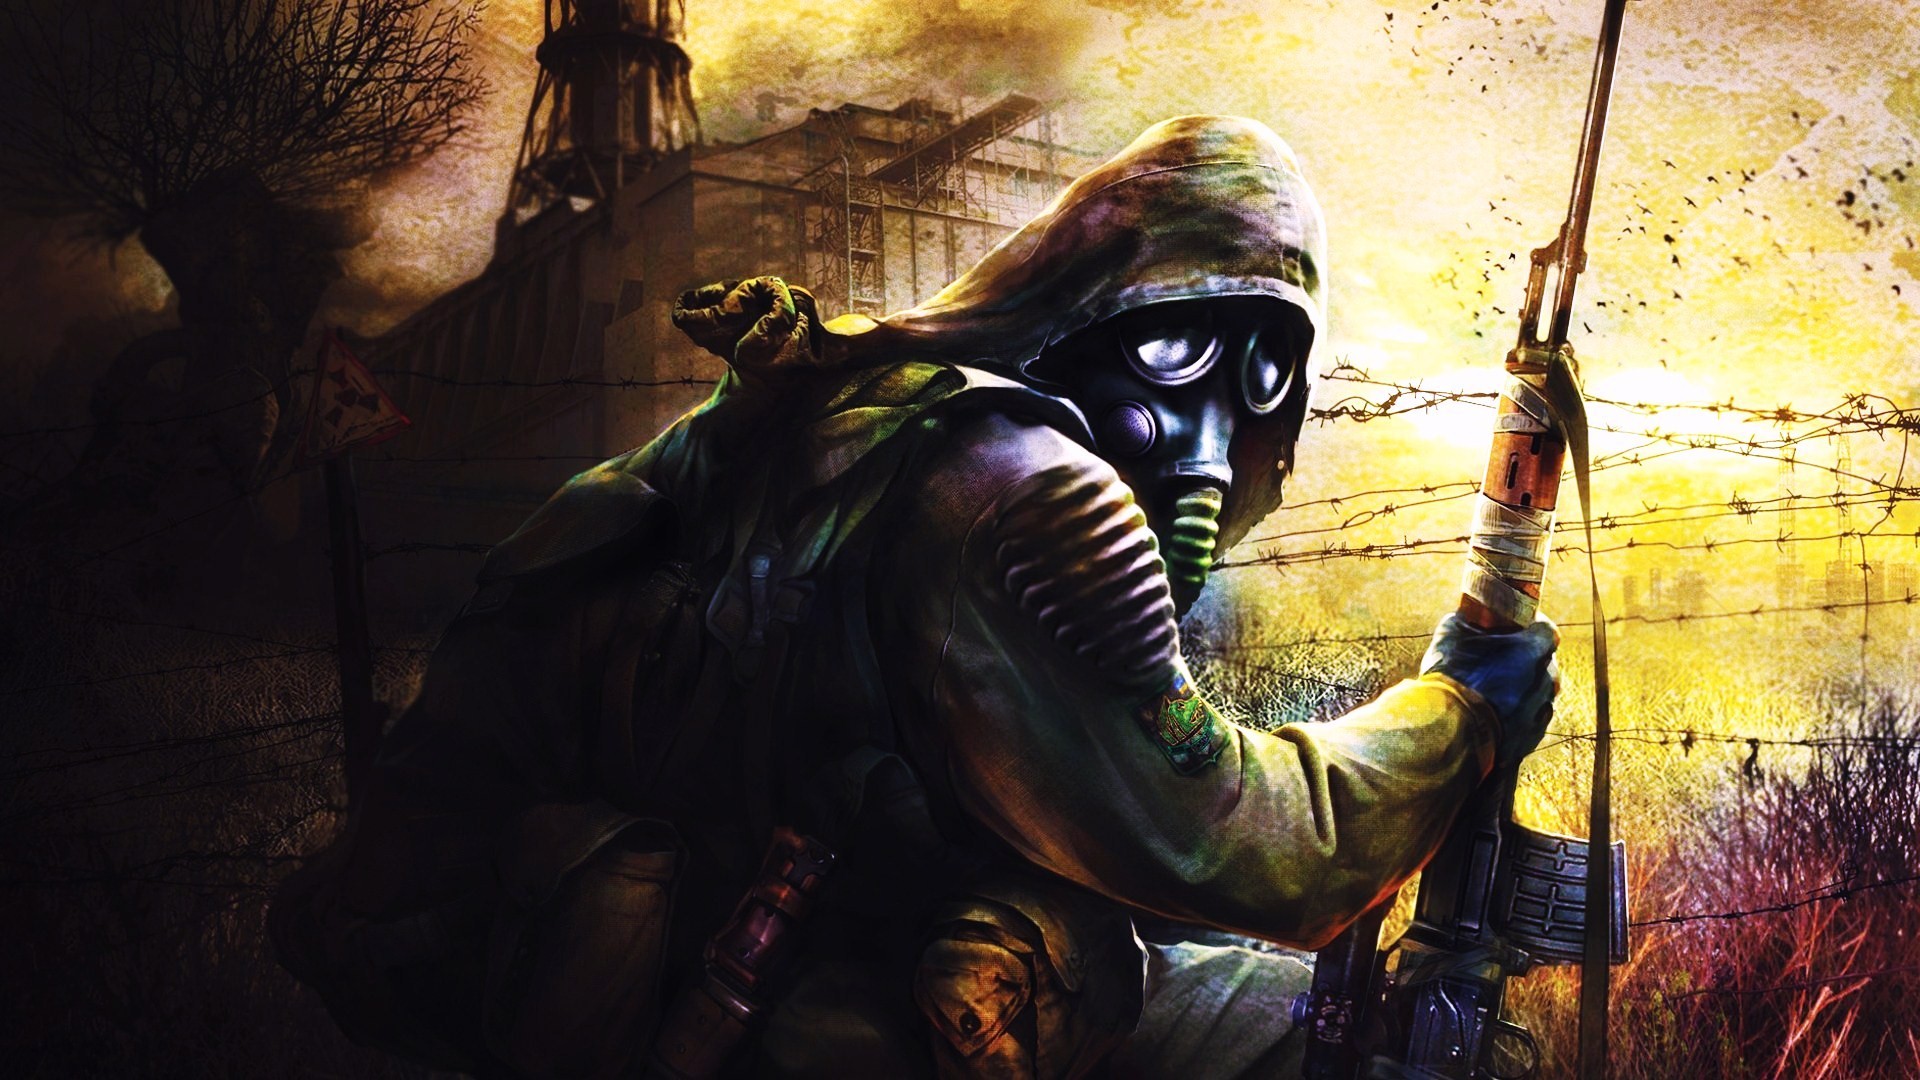 General 1920x1080 S.T.A.L.K.E.R.: Shadow of Chernobyl video games video game art rifles PC gaming science fiction